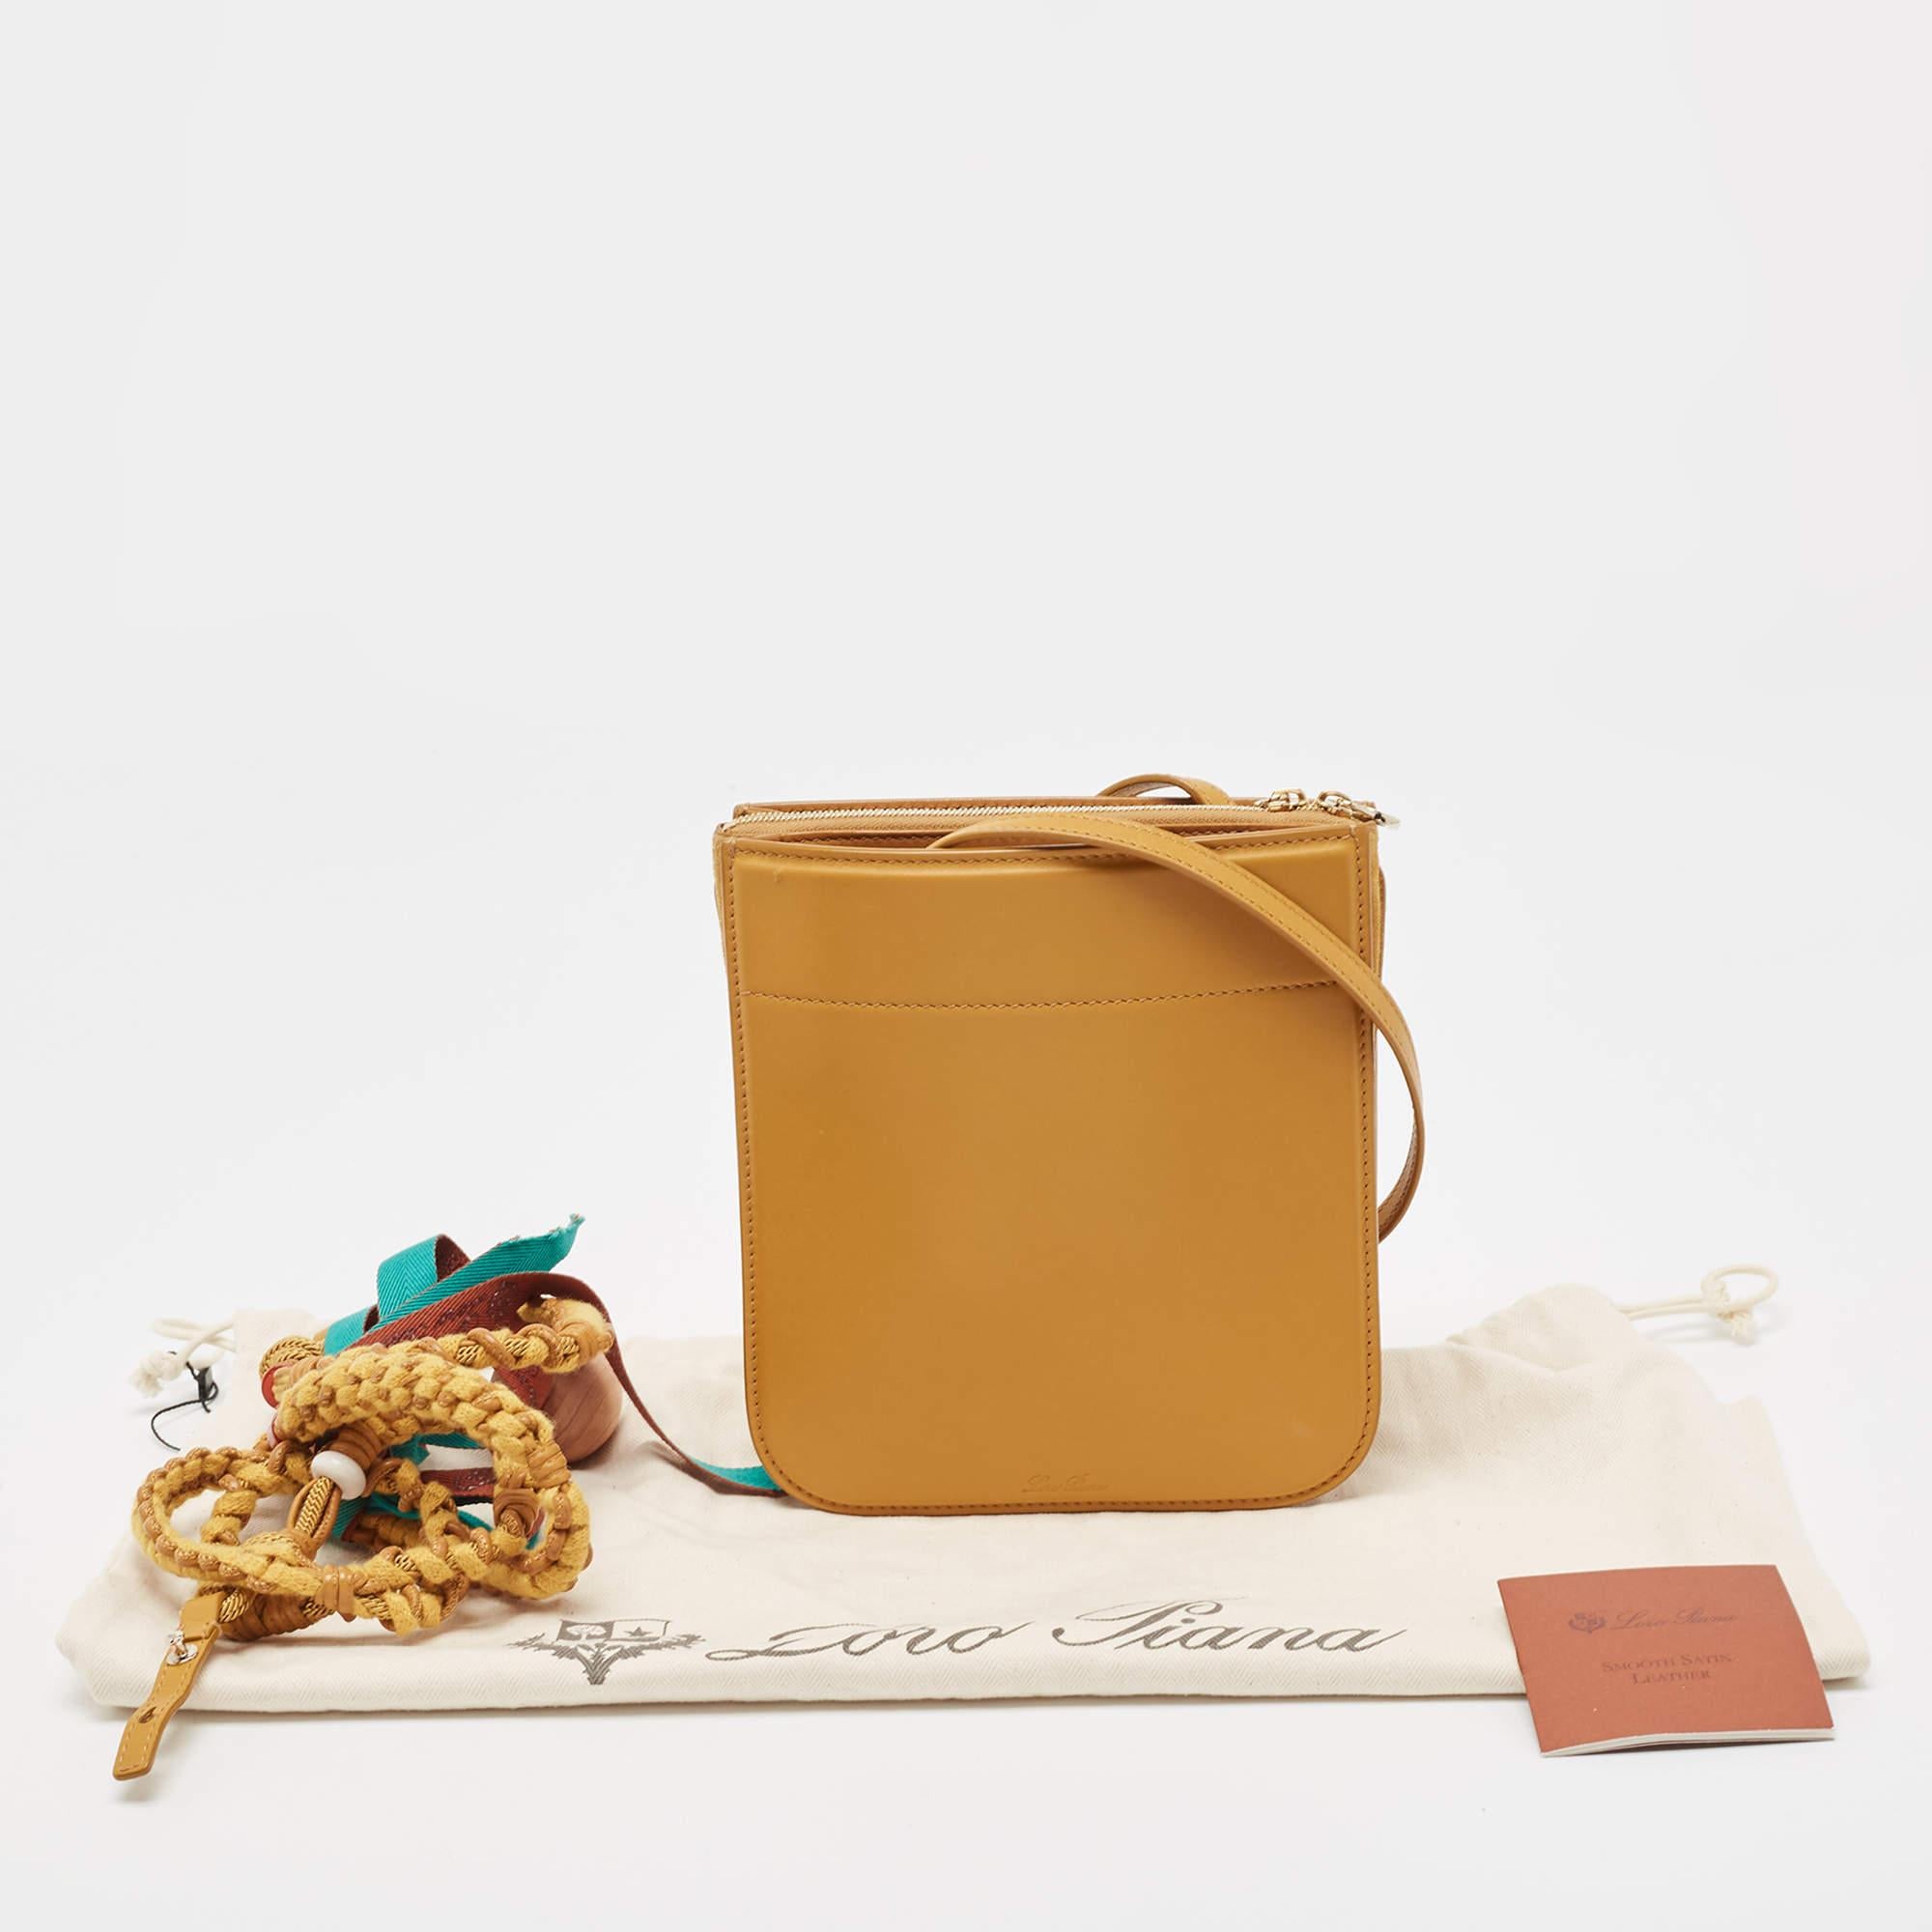 Loro Piana Yellow Leather And Suede My Way Crossbody Bag 10